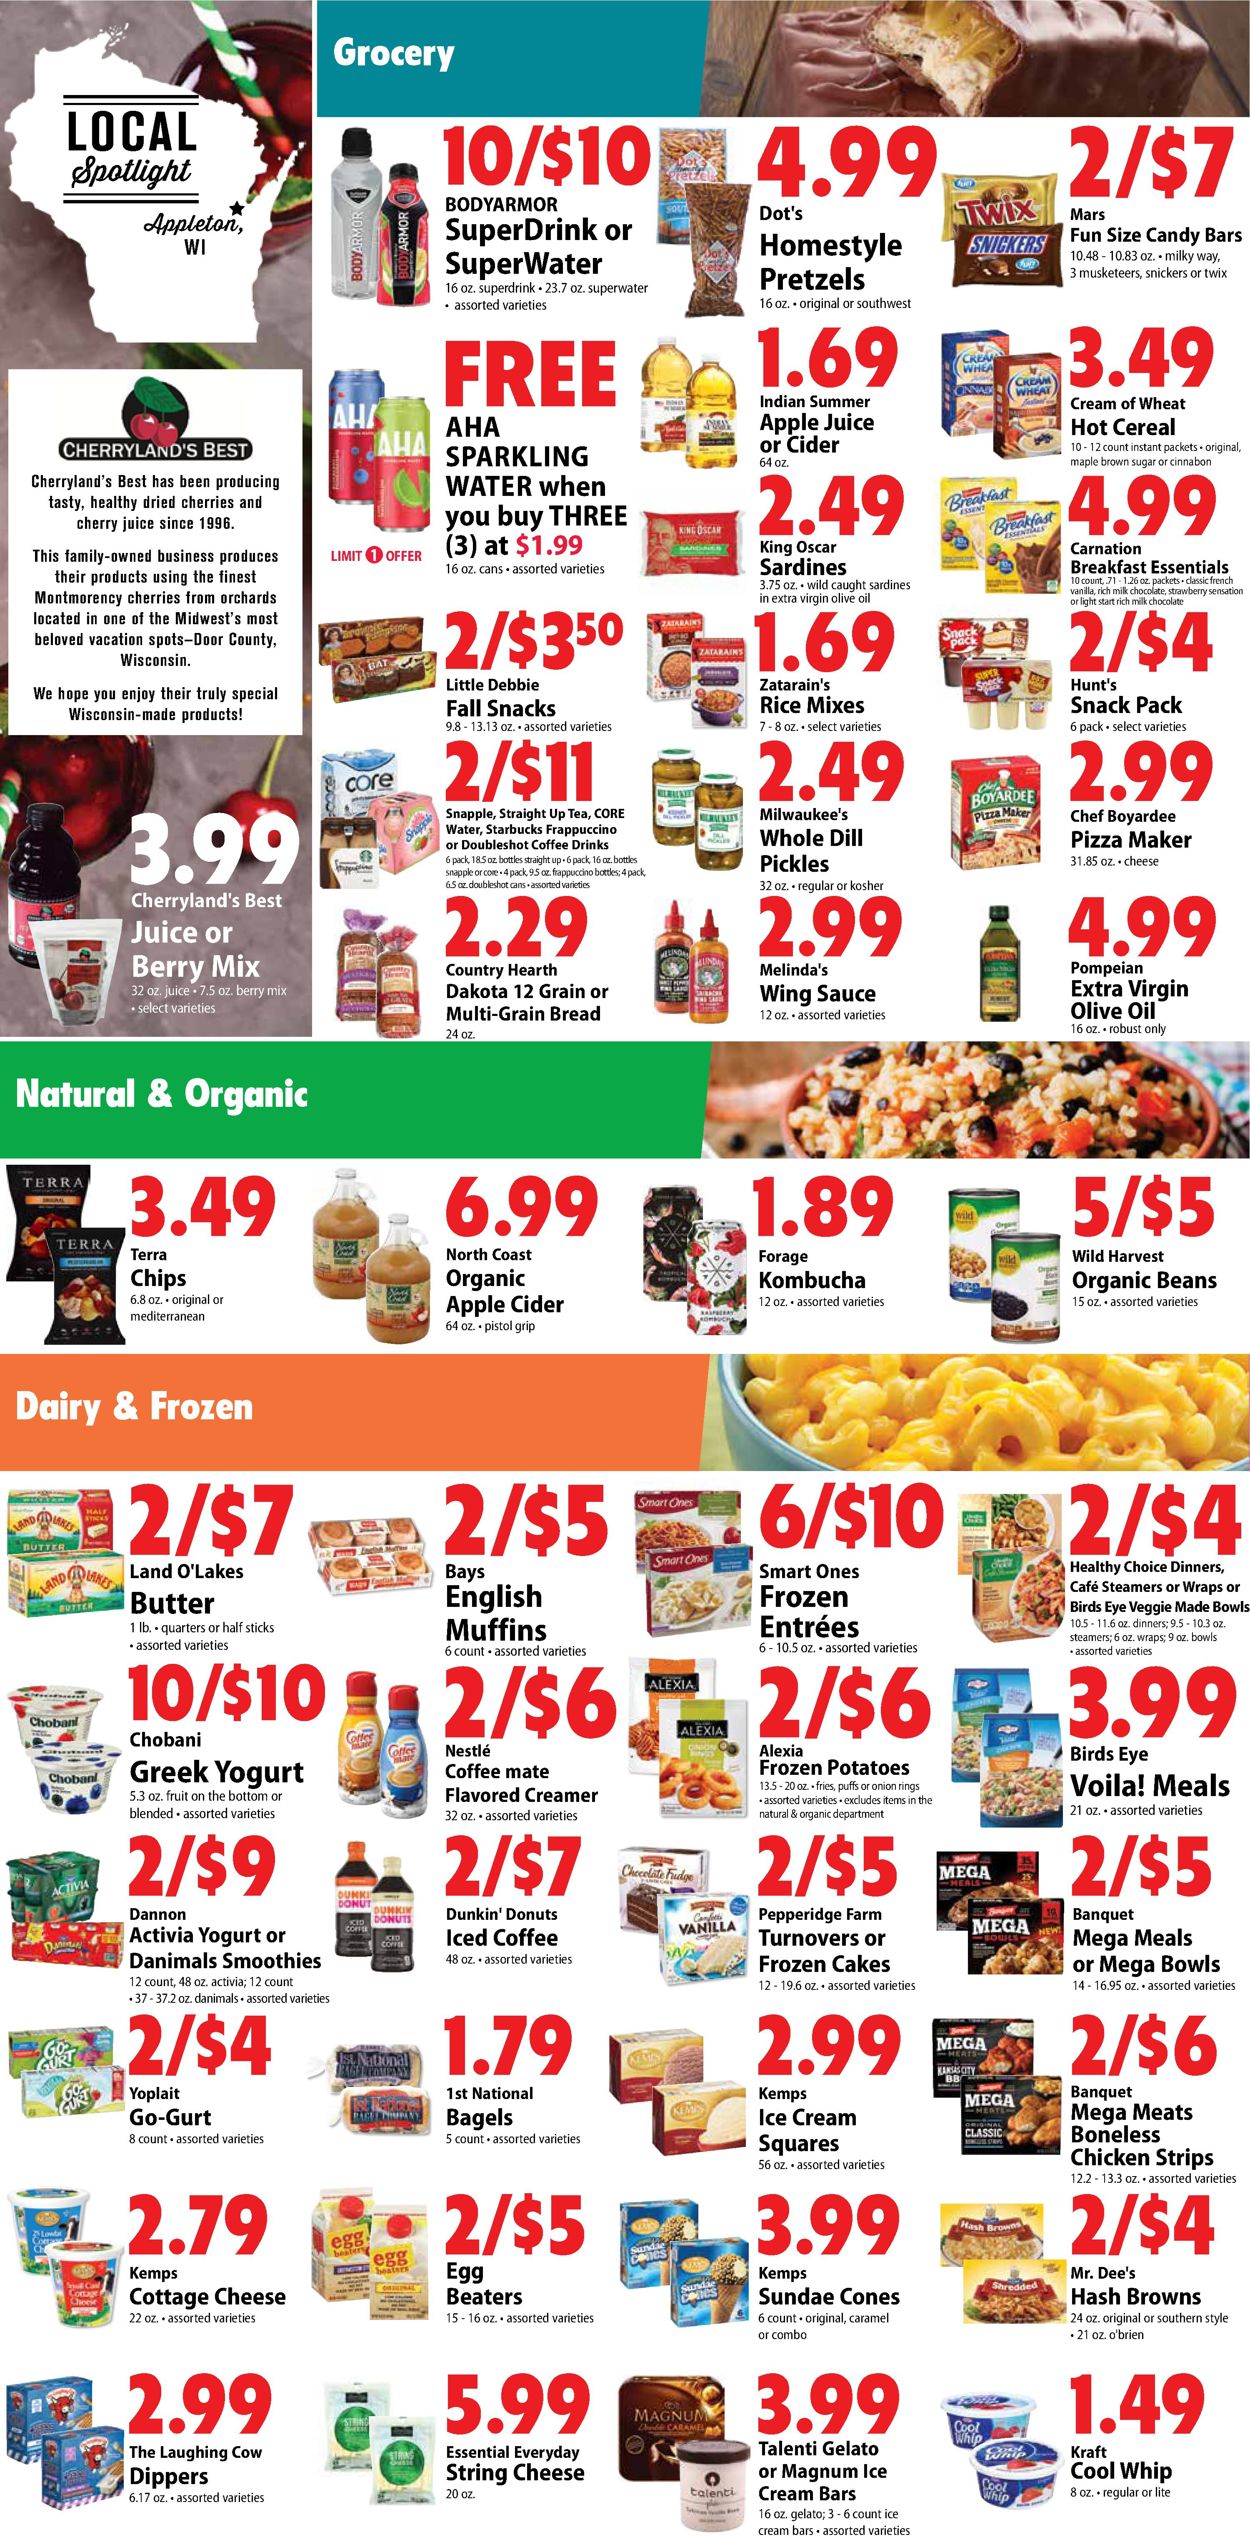 Festival Foods Current weekly ad 09/30 10/06/2020 [5]